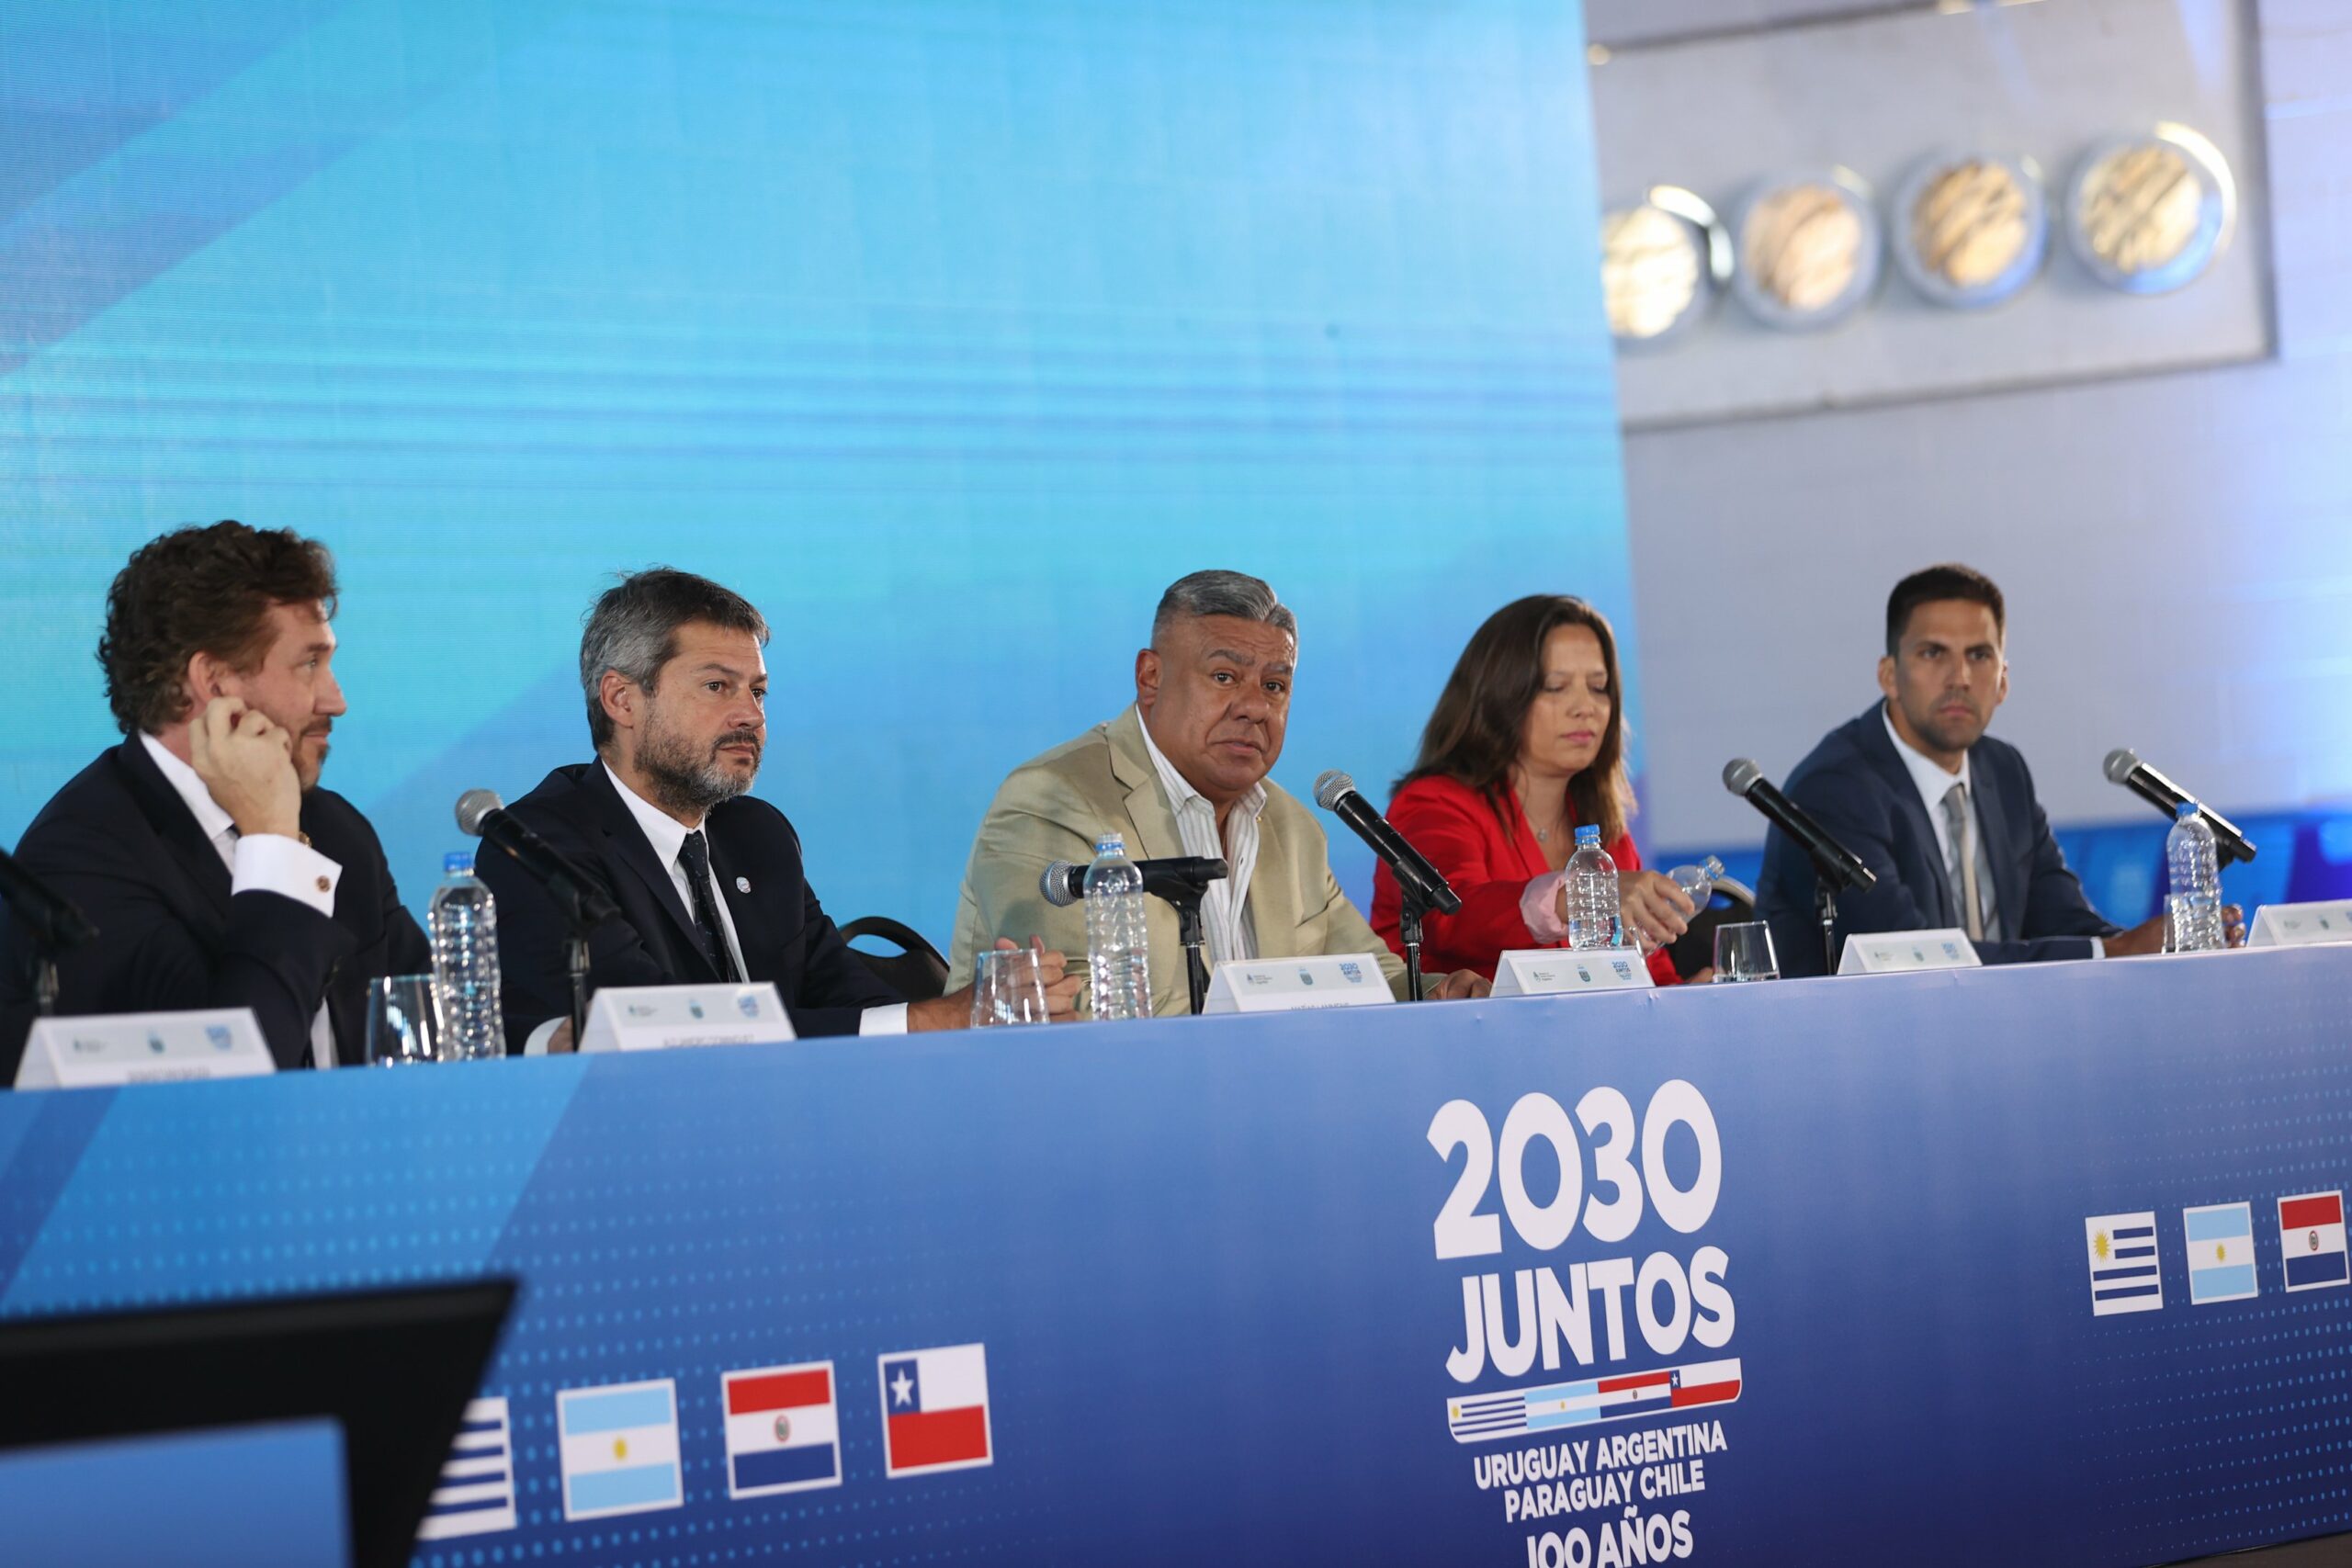 Argentina, Chile, Paraguay and Uruguay announce joint candidacy to host 2030 World Cup - Buenos Aires Herald